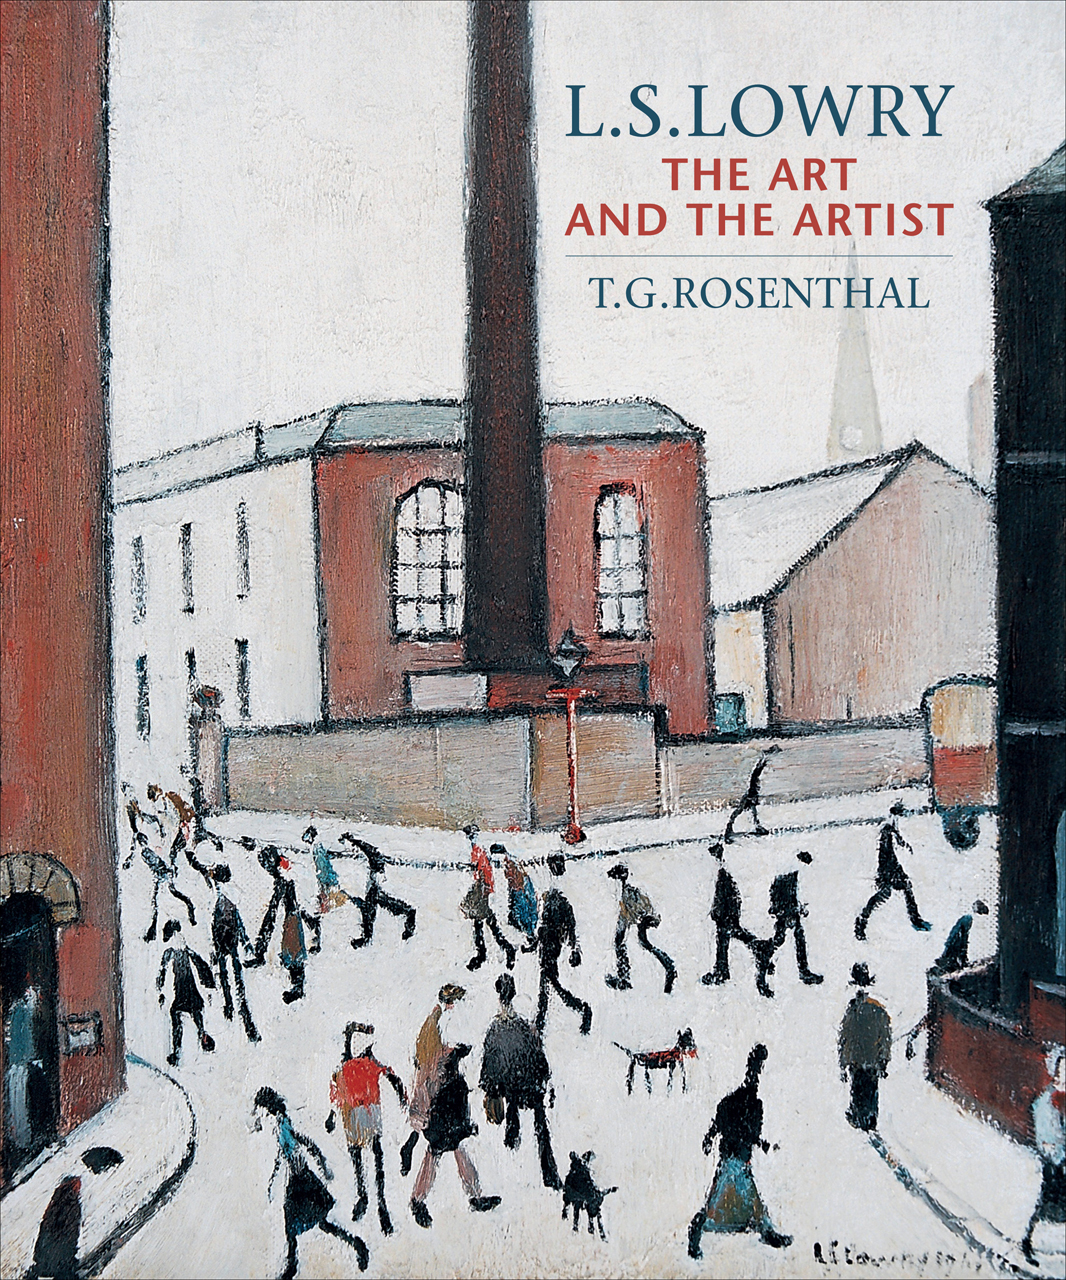 The book L. S. Lowry: The Art and the Artist - Second Edition, T. G